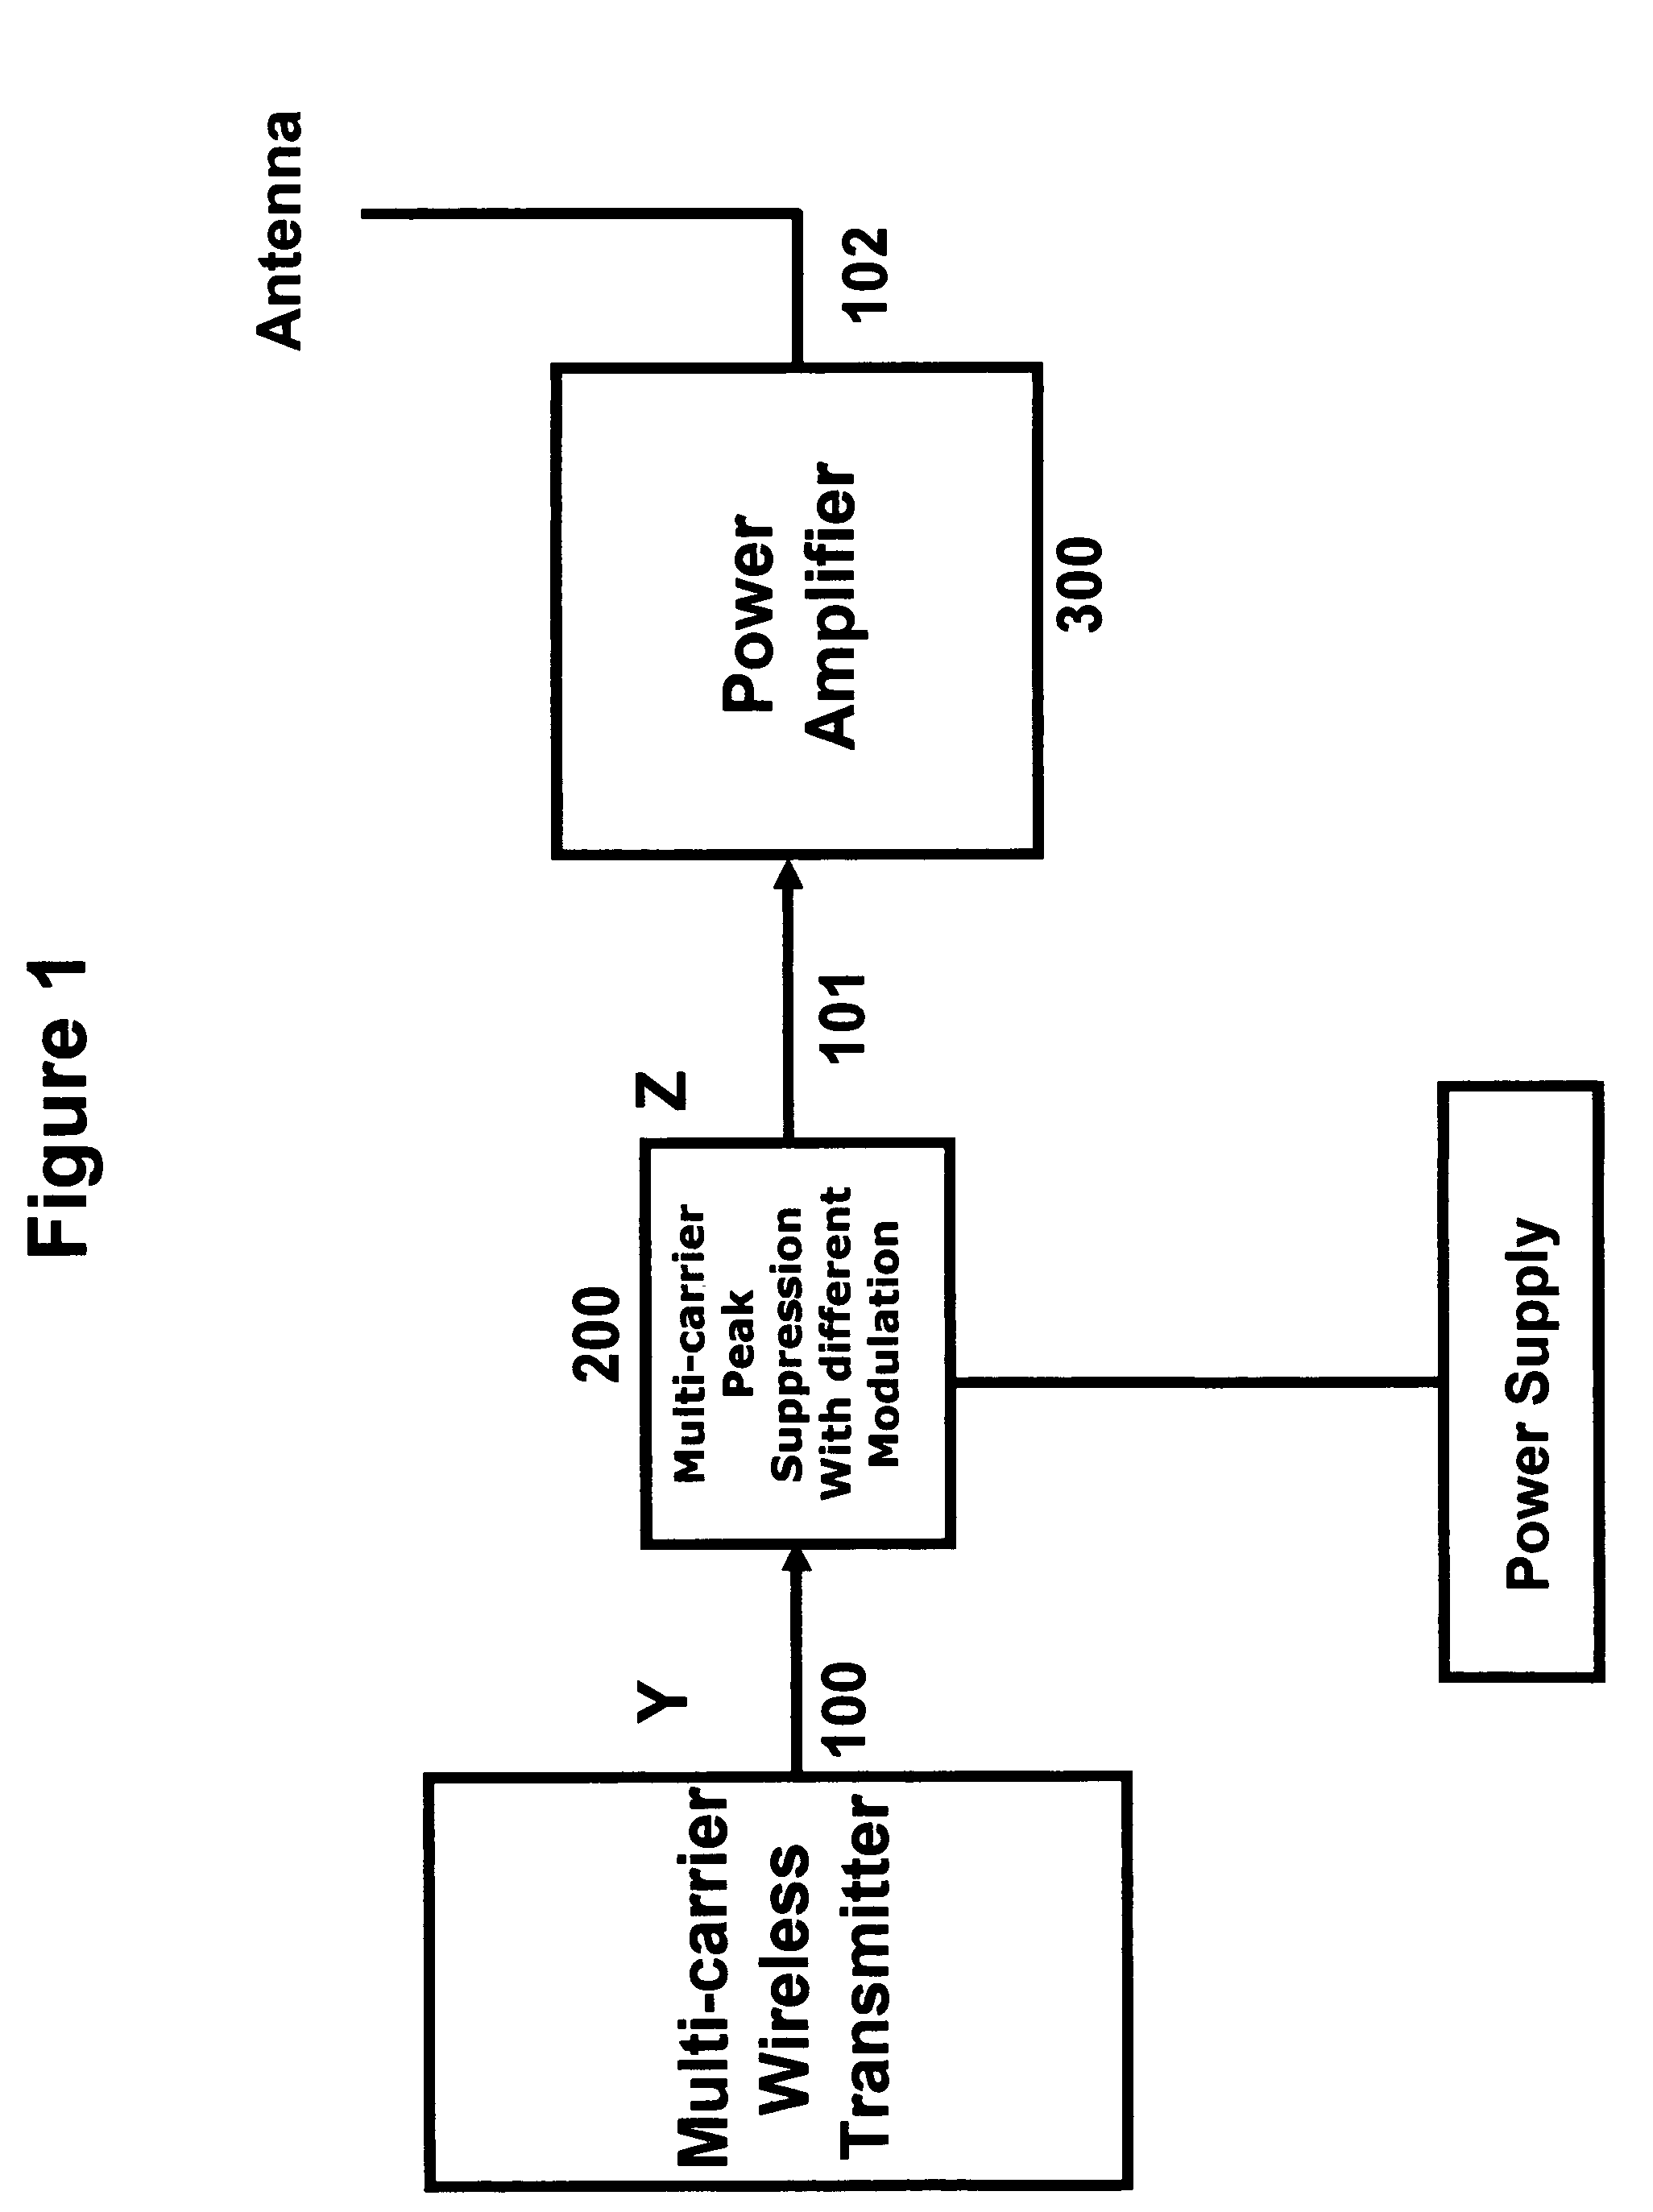 Peak suppression of multi-carrier signal with different modulation